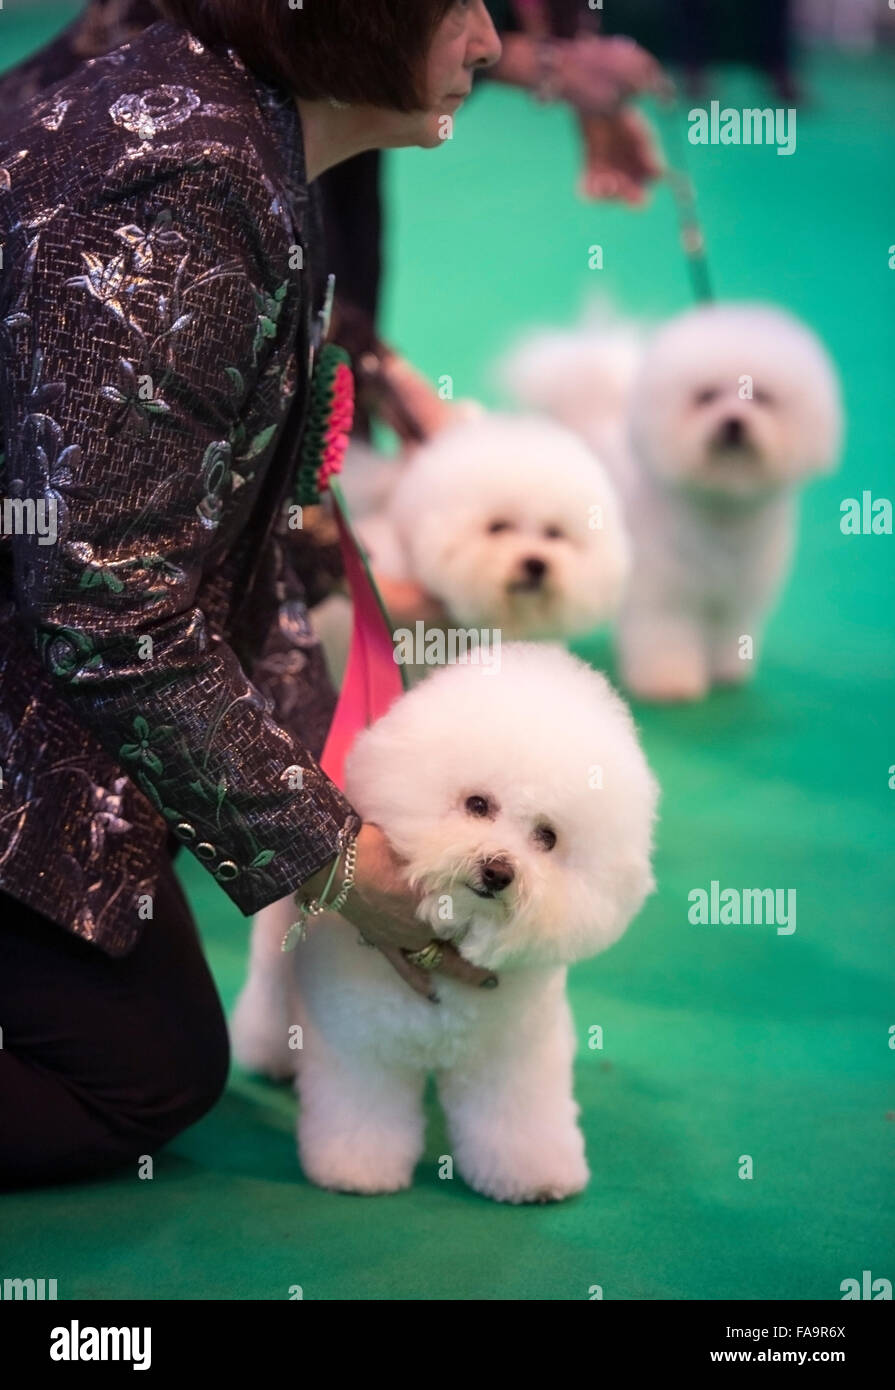 Crufts dog show at the NEC, Birmingham - Bichon Frise dogs showing in the Breeders Cup section UK 2015 Stock Photo